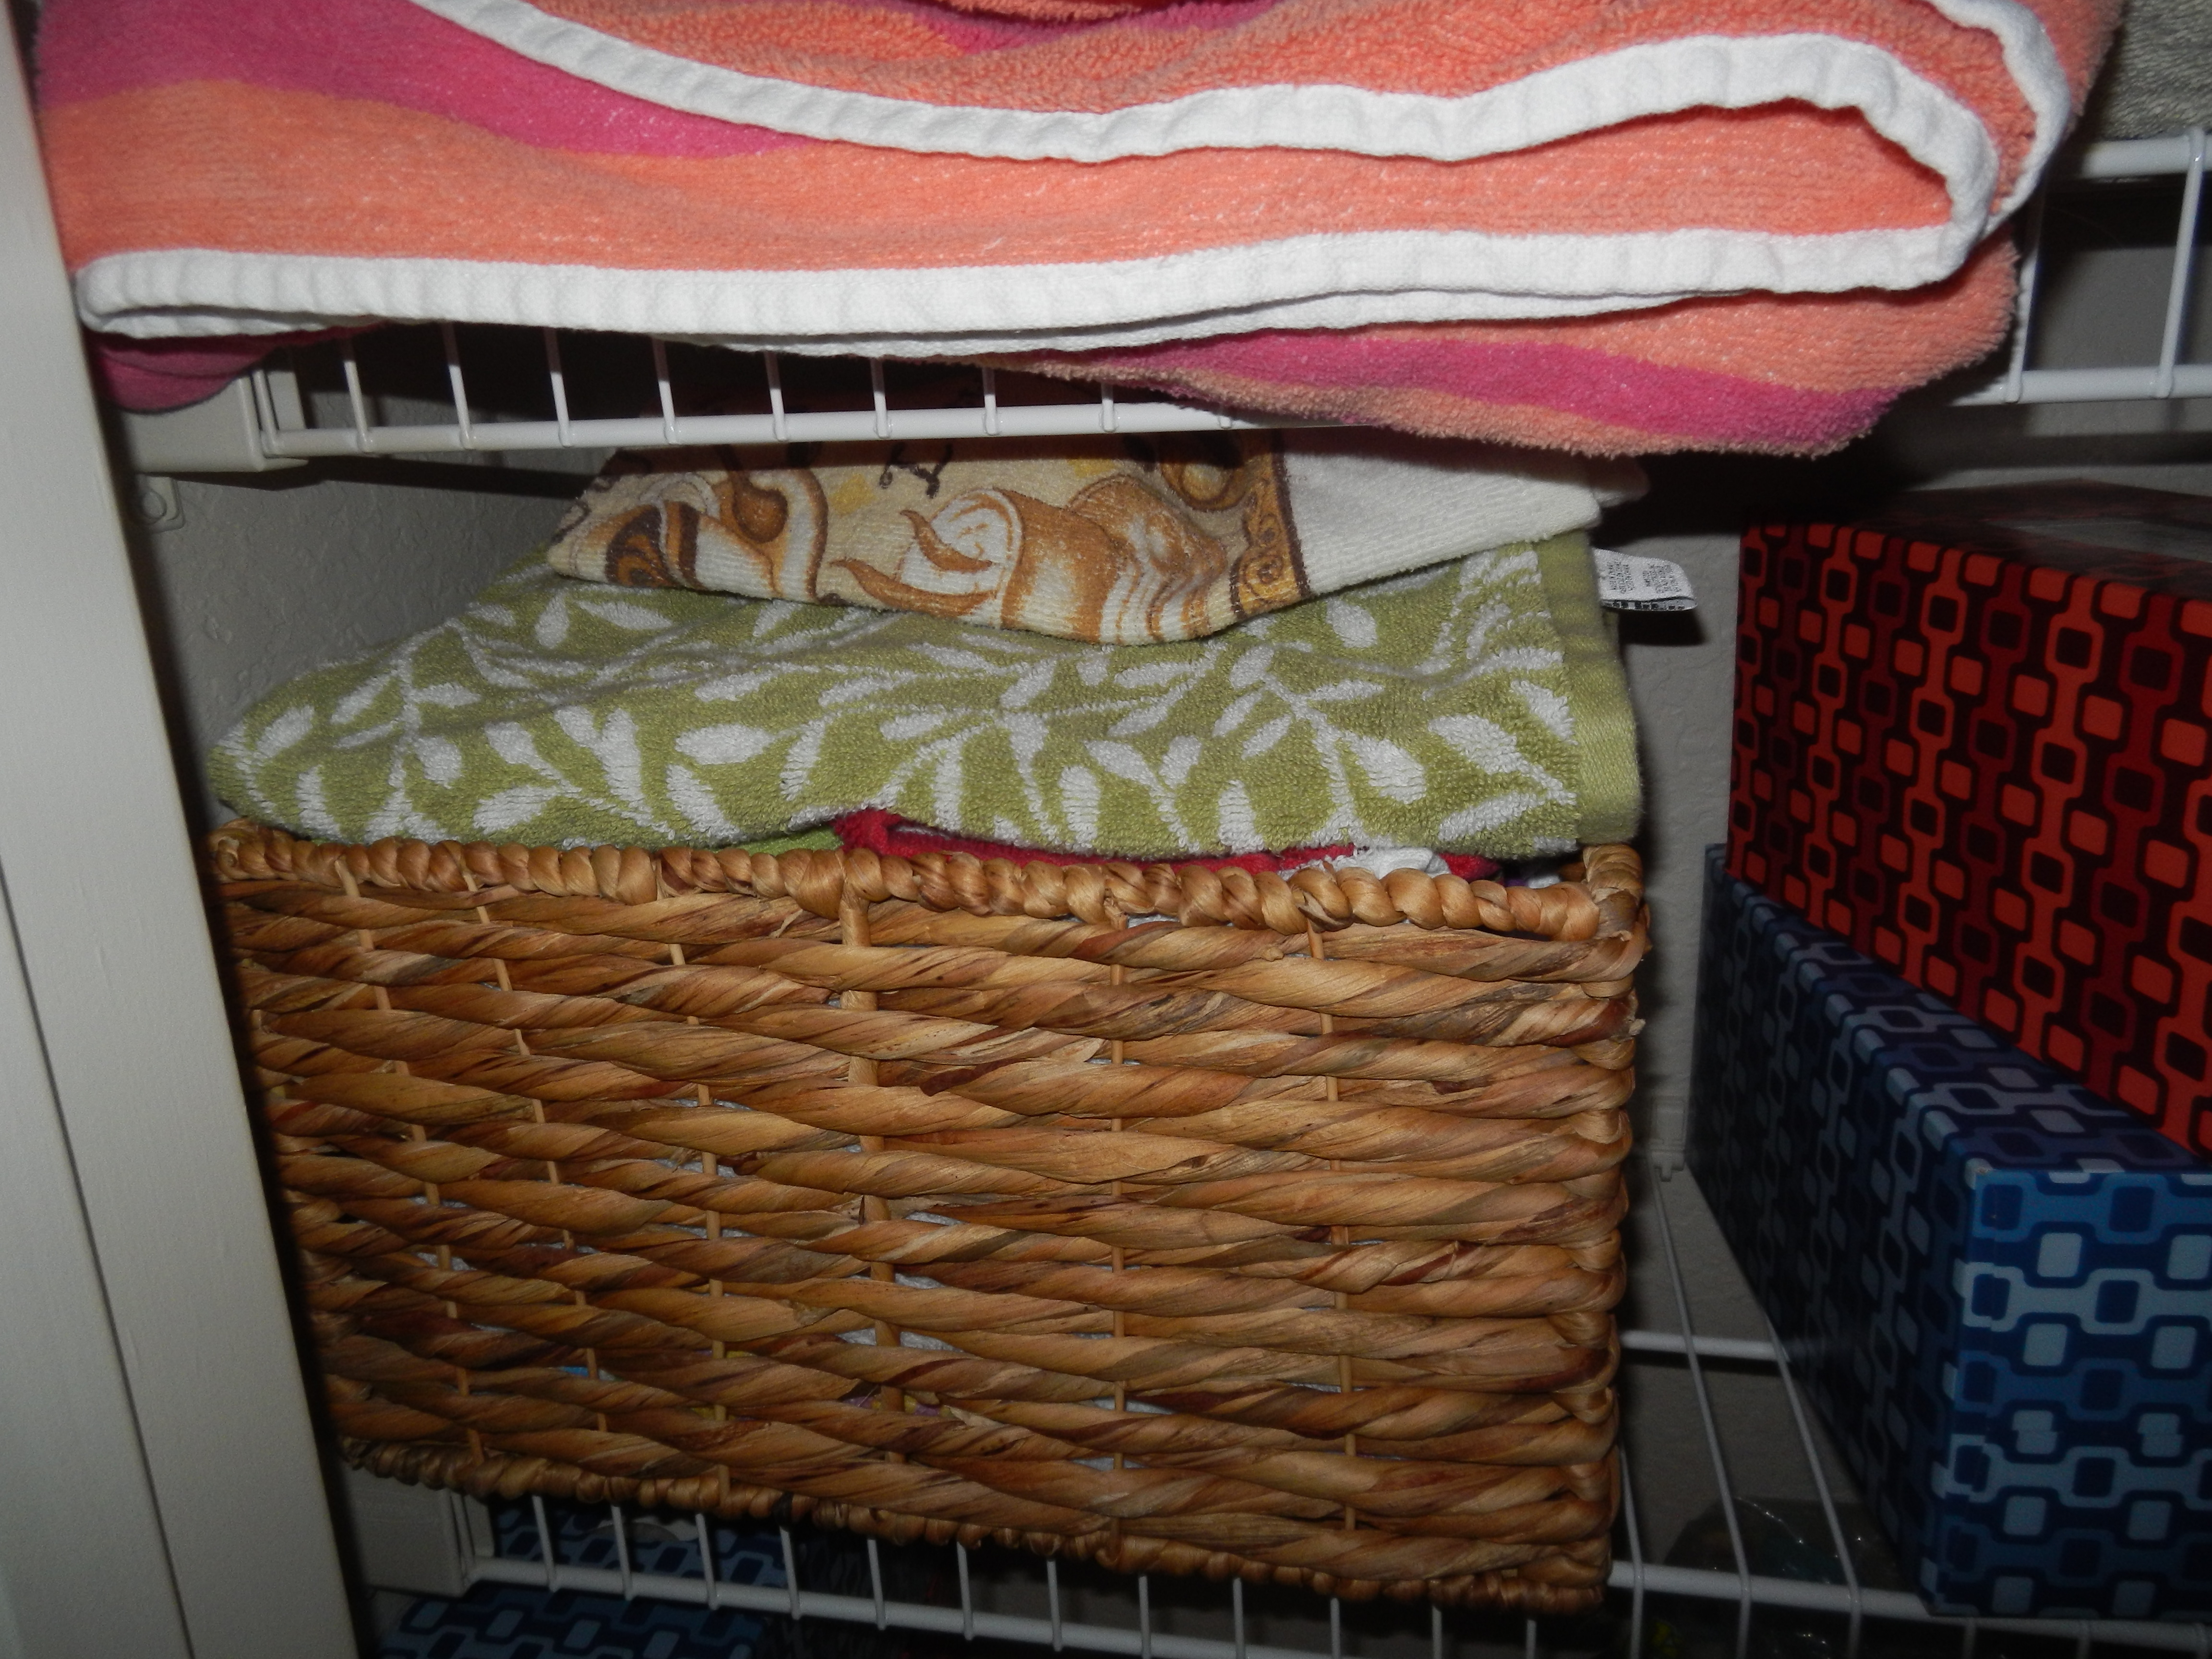 Making Your Apartment home baskets 